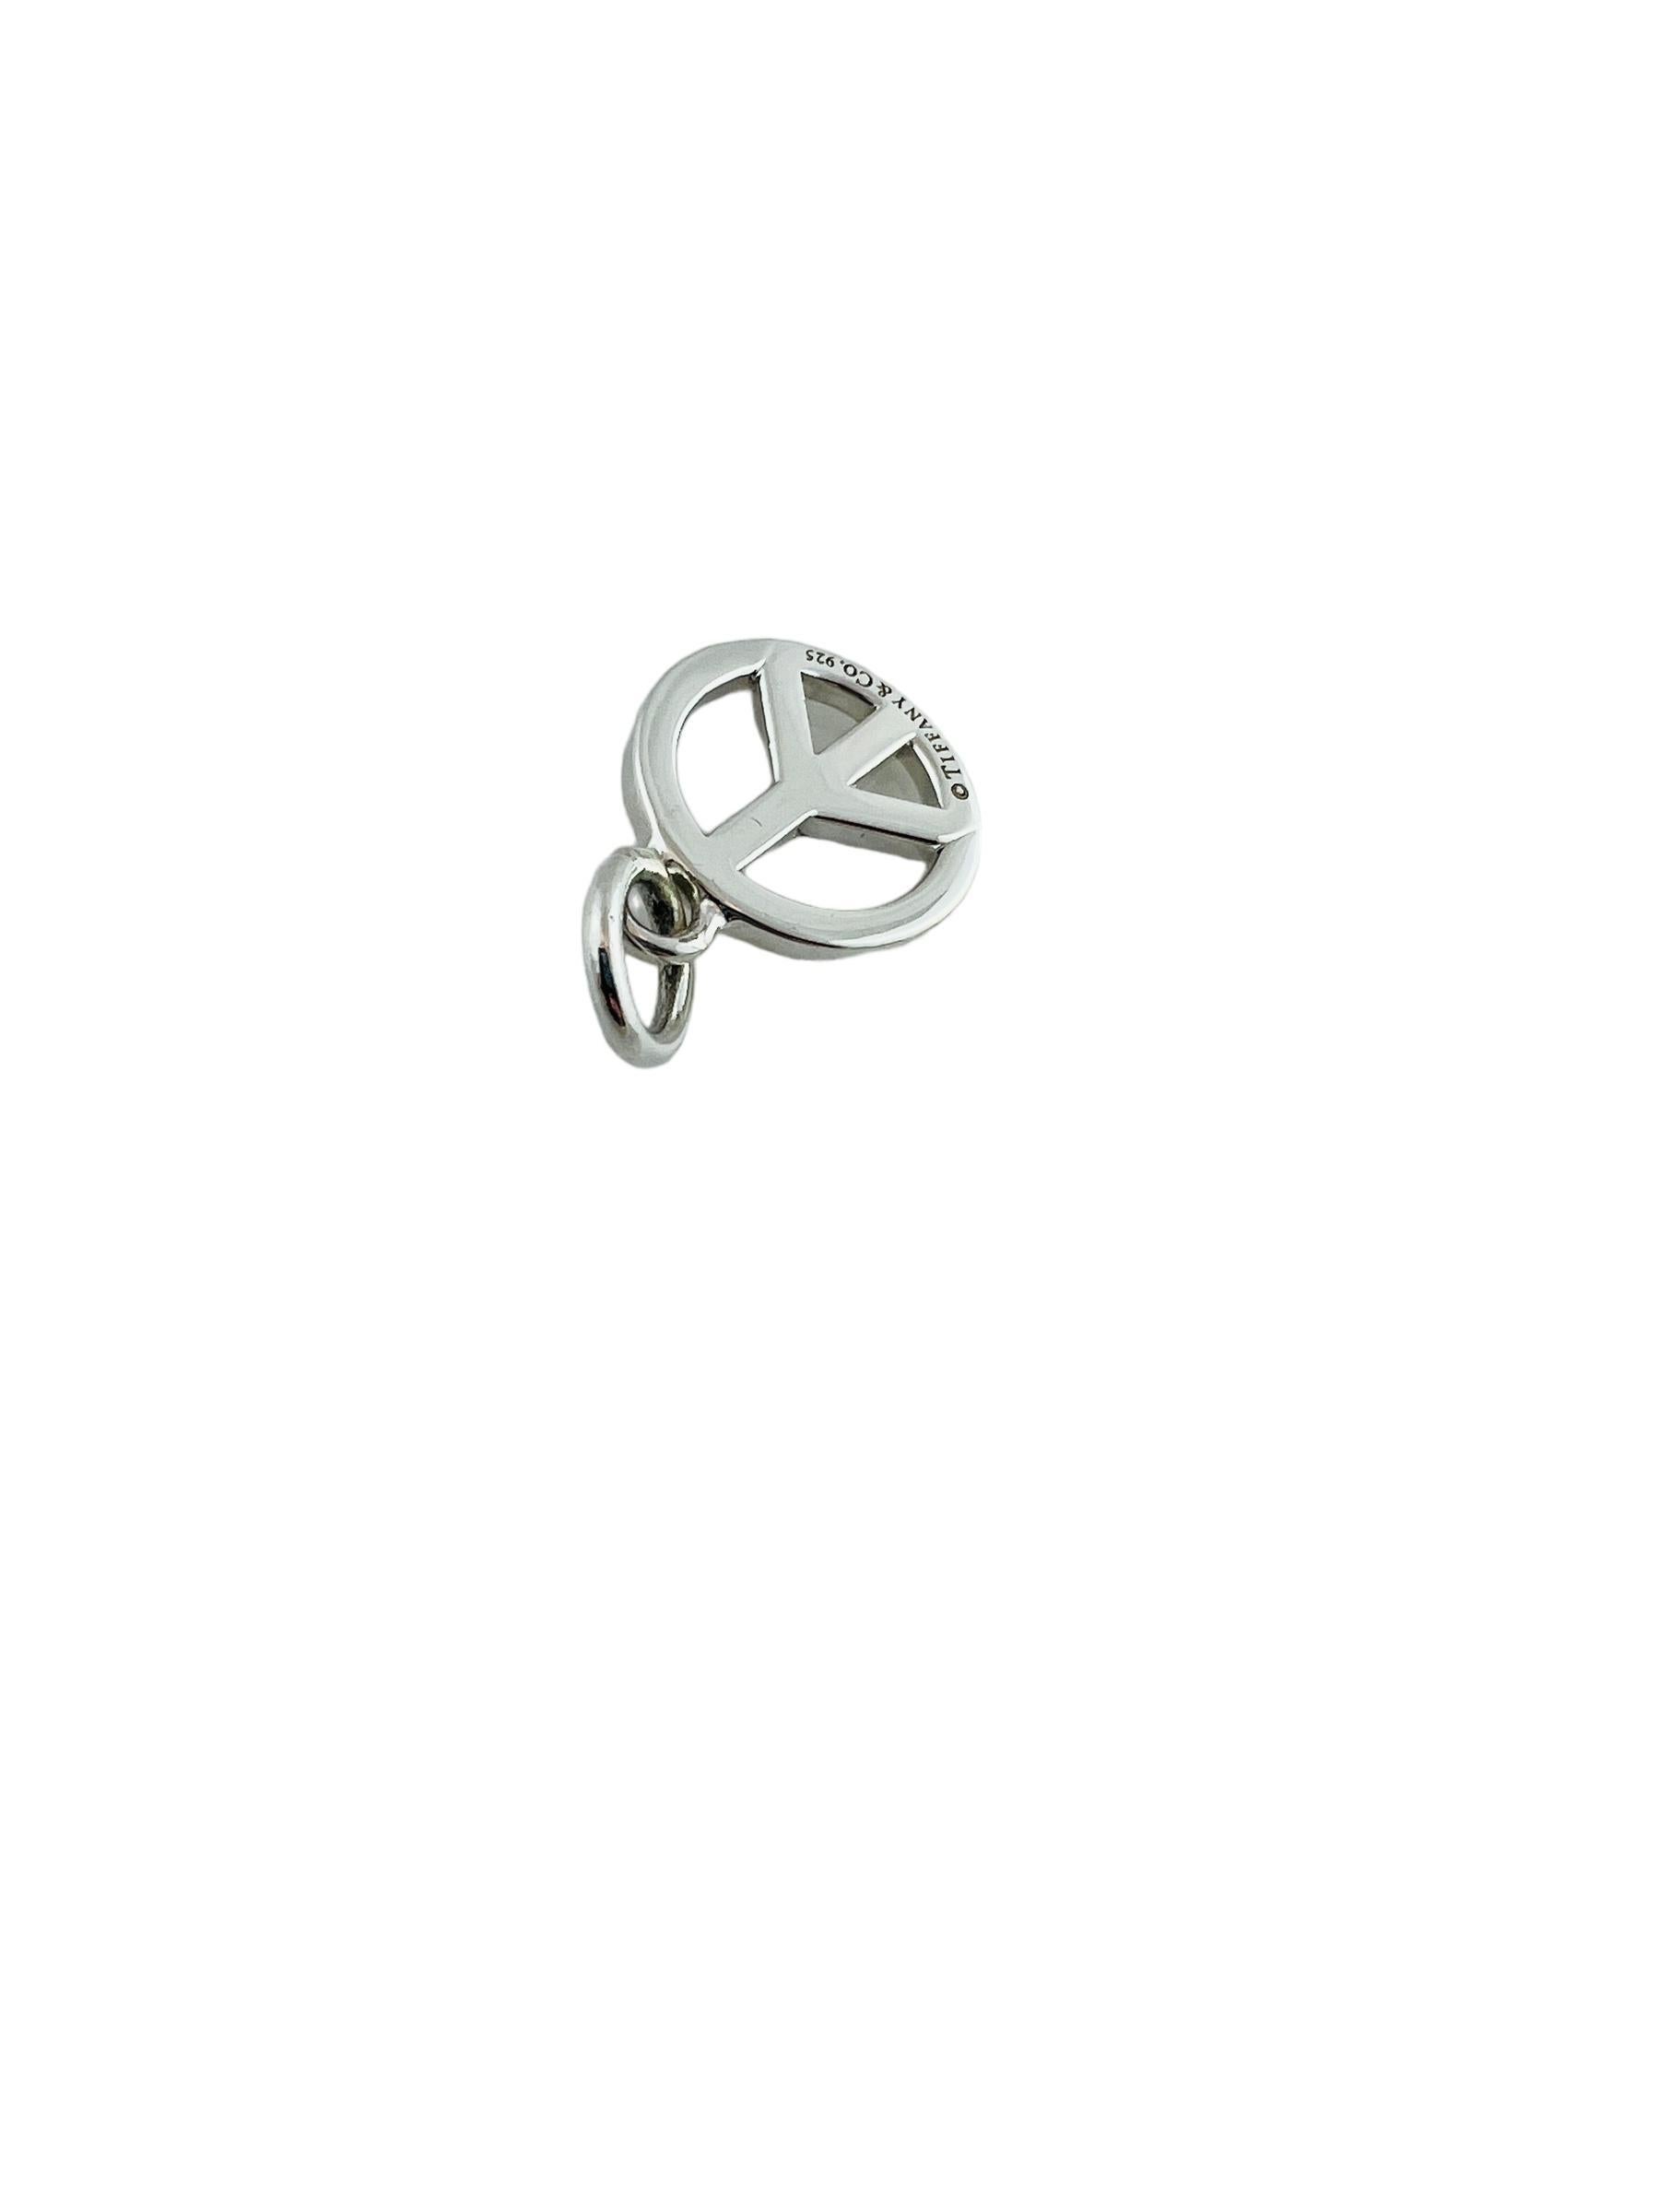 Tiffany & Co. Sterling Silver Peace Sign Pendant #15448 3